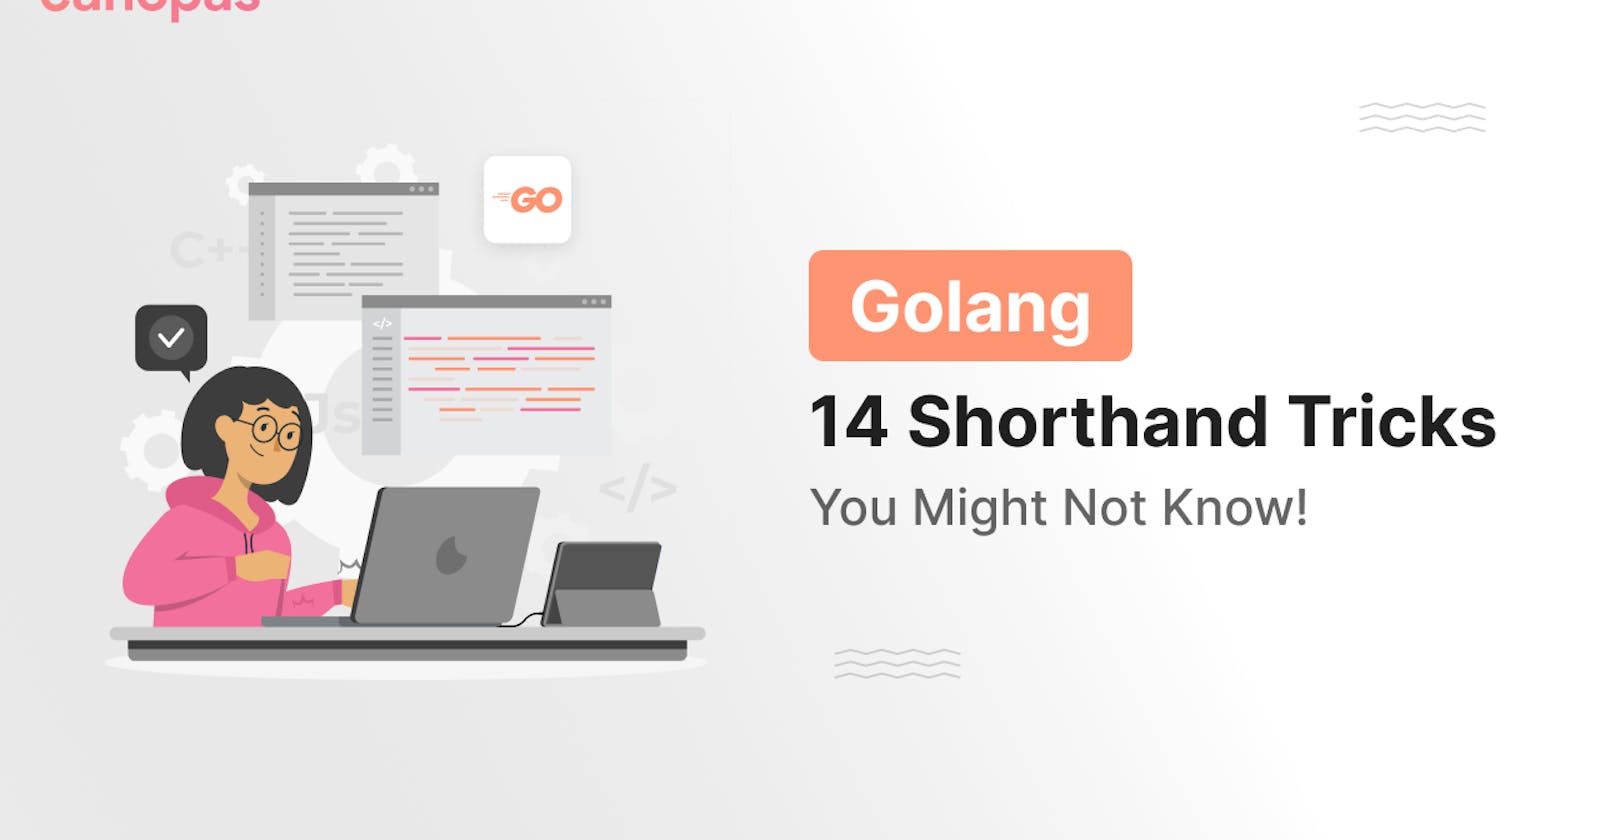 Golang: 14 Shorthand Tricks You Might Not Know!